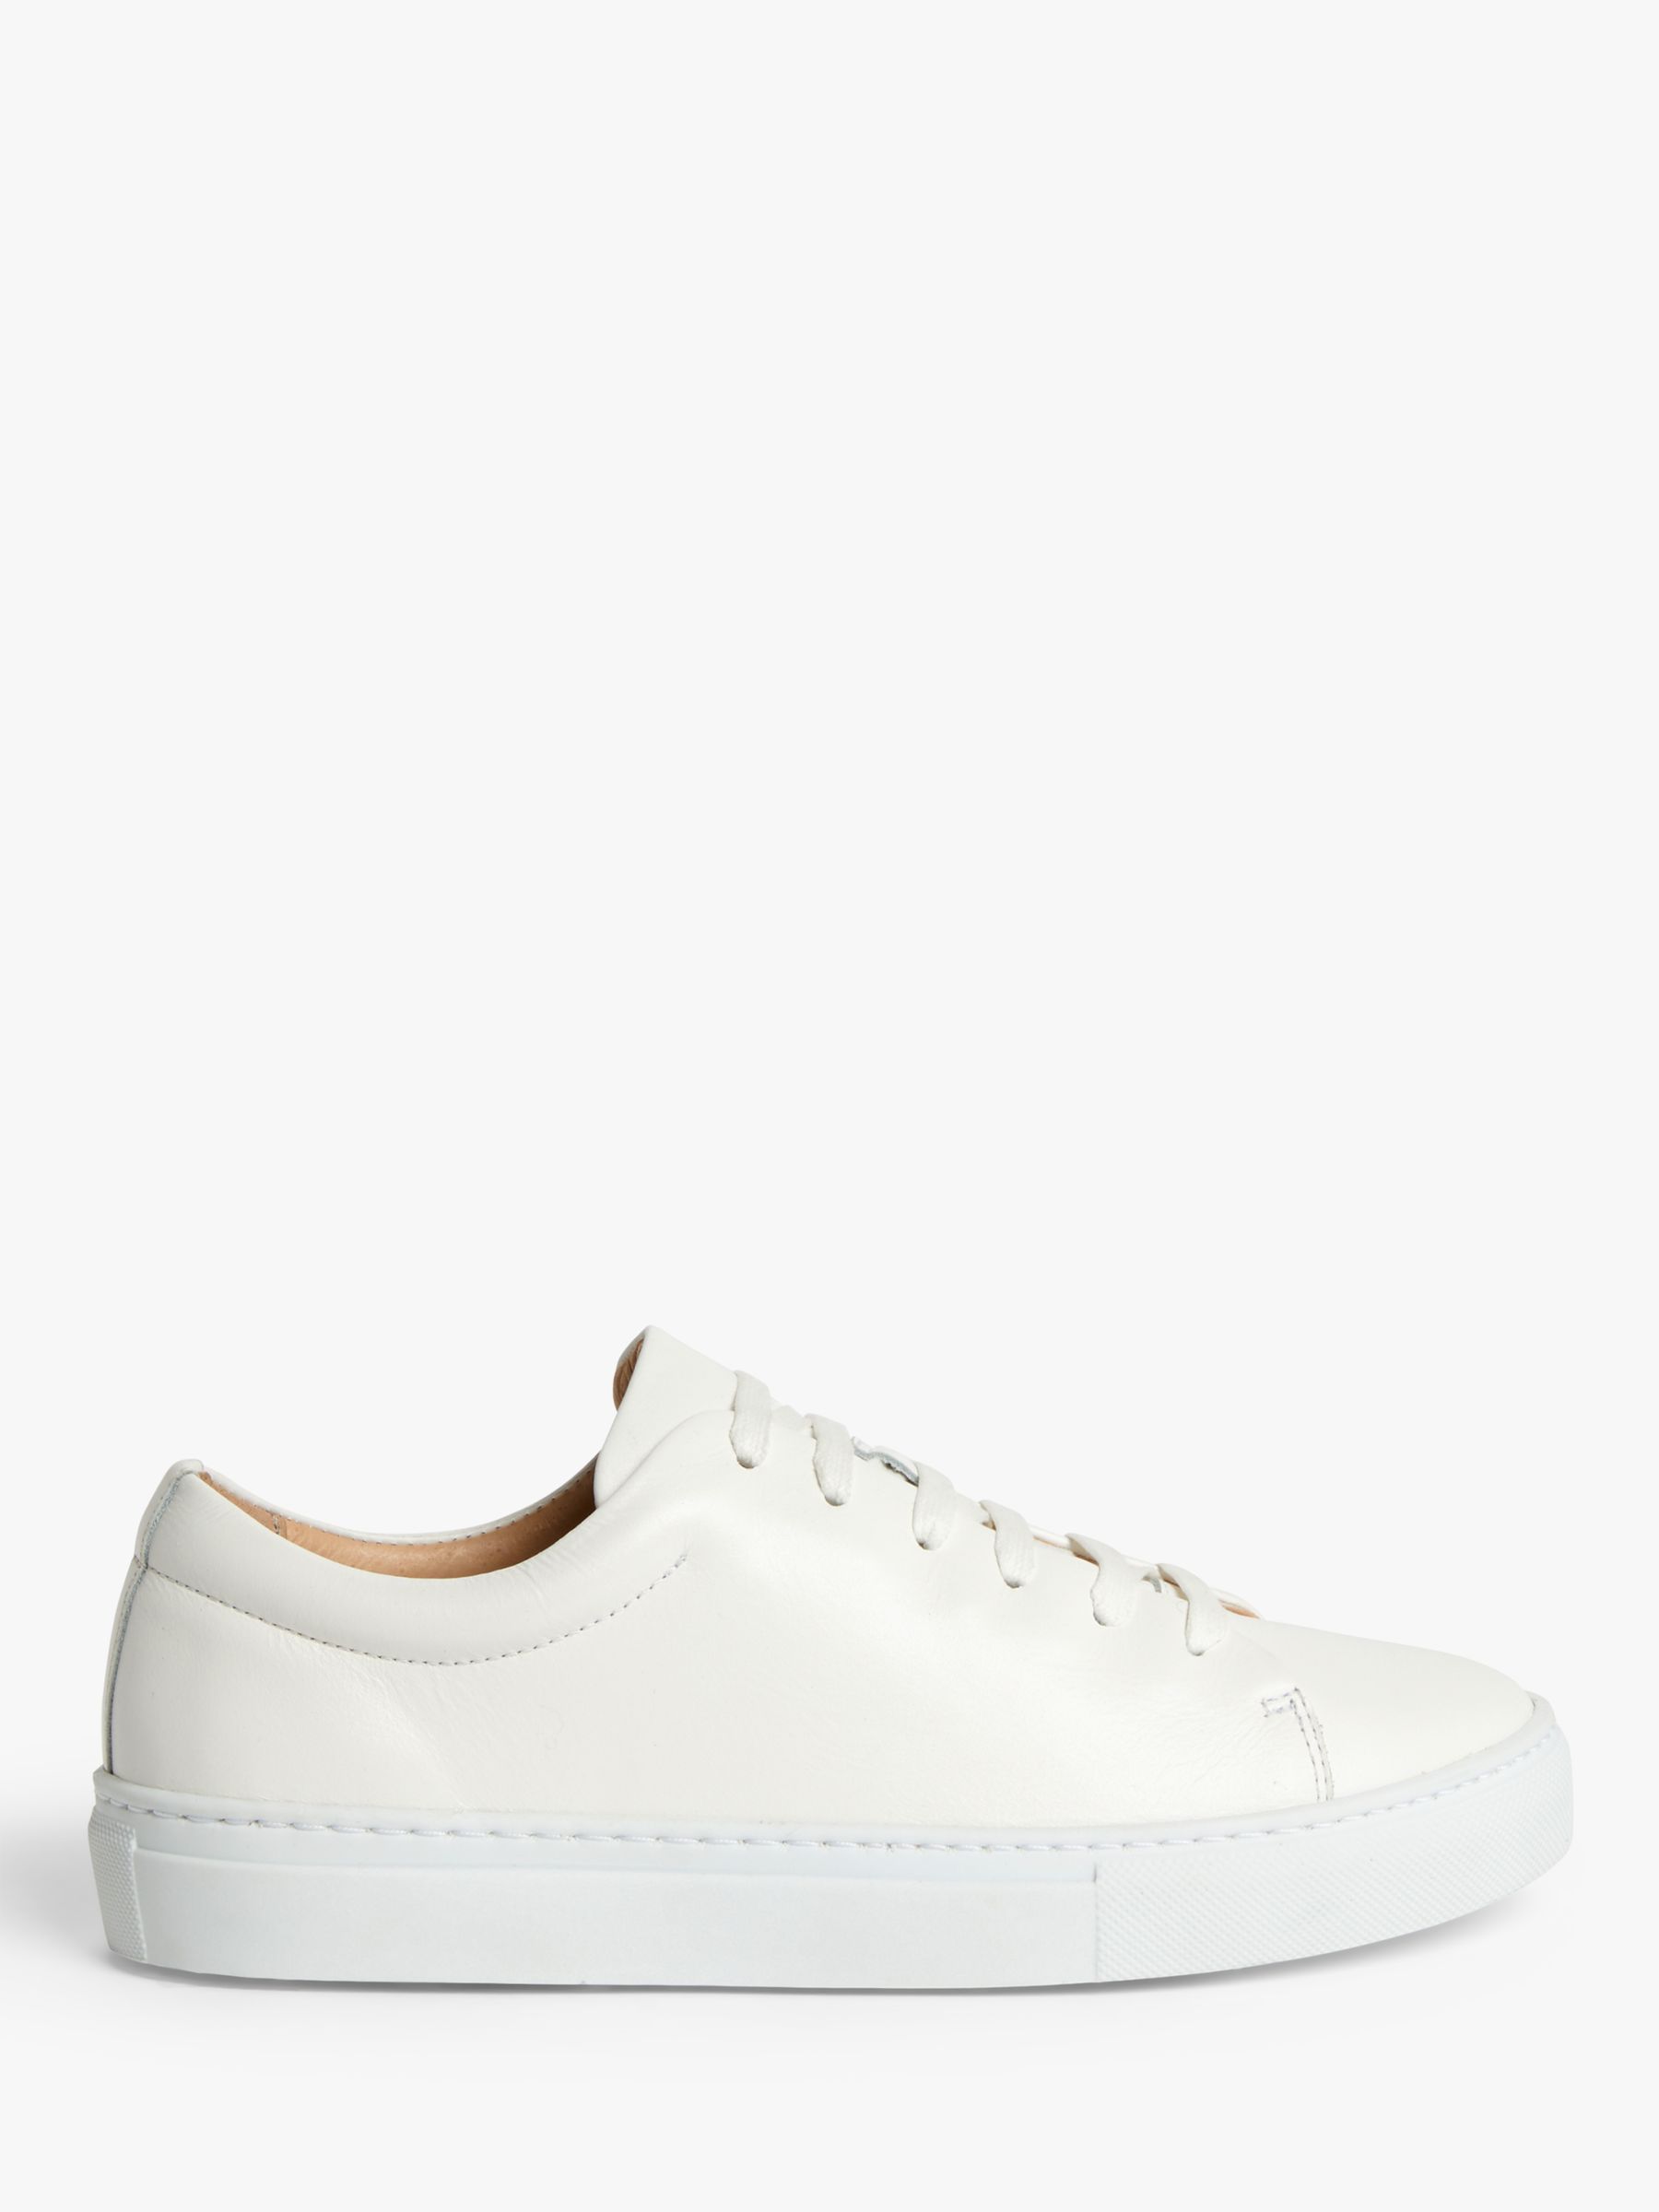 John Lewis Flora Lace Up Trainers, Off White at John Lewis & Partners